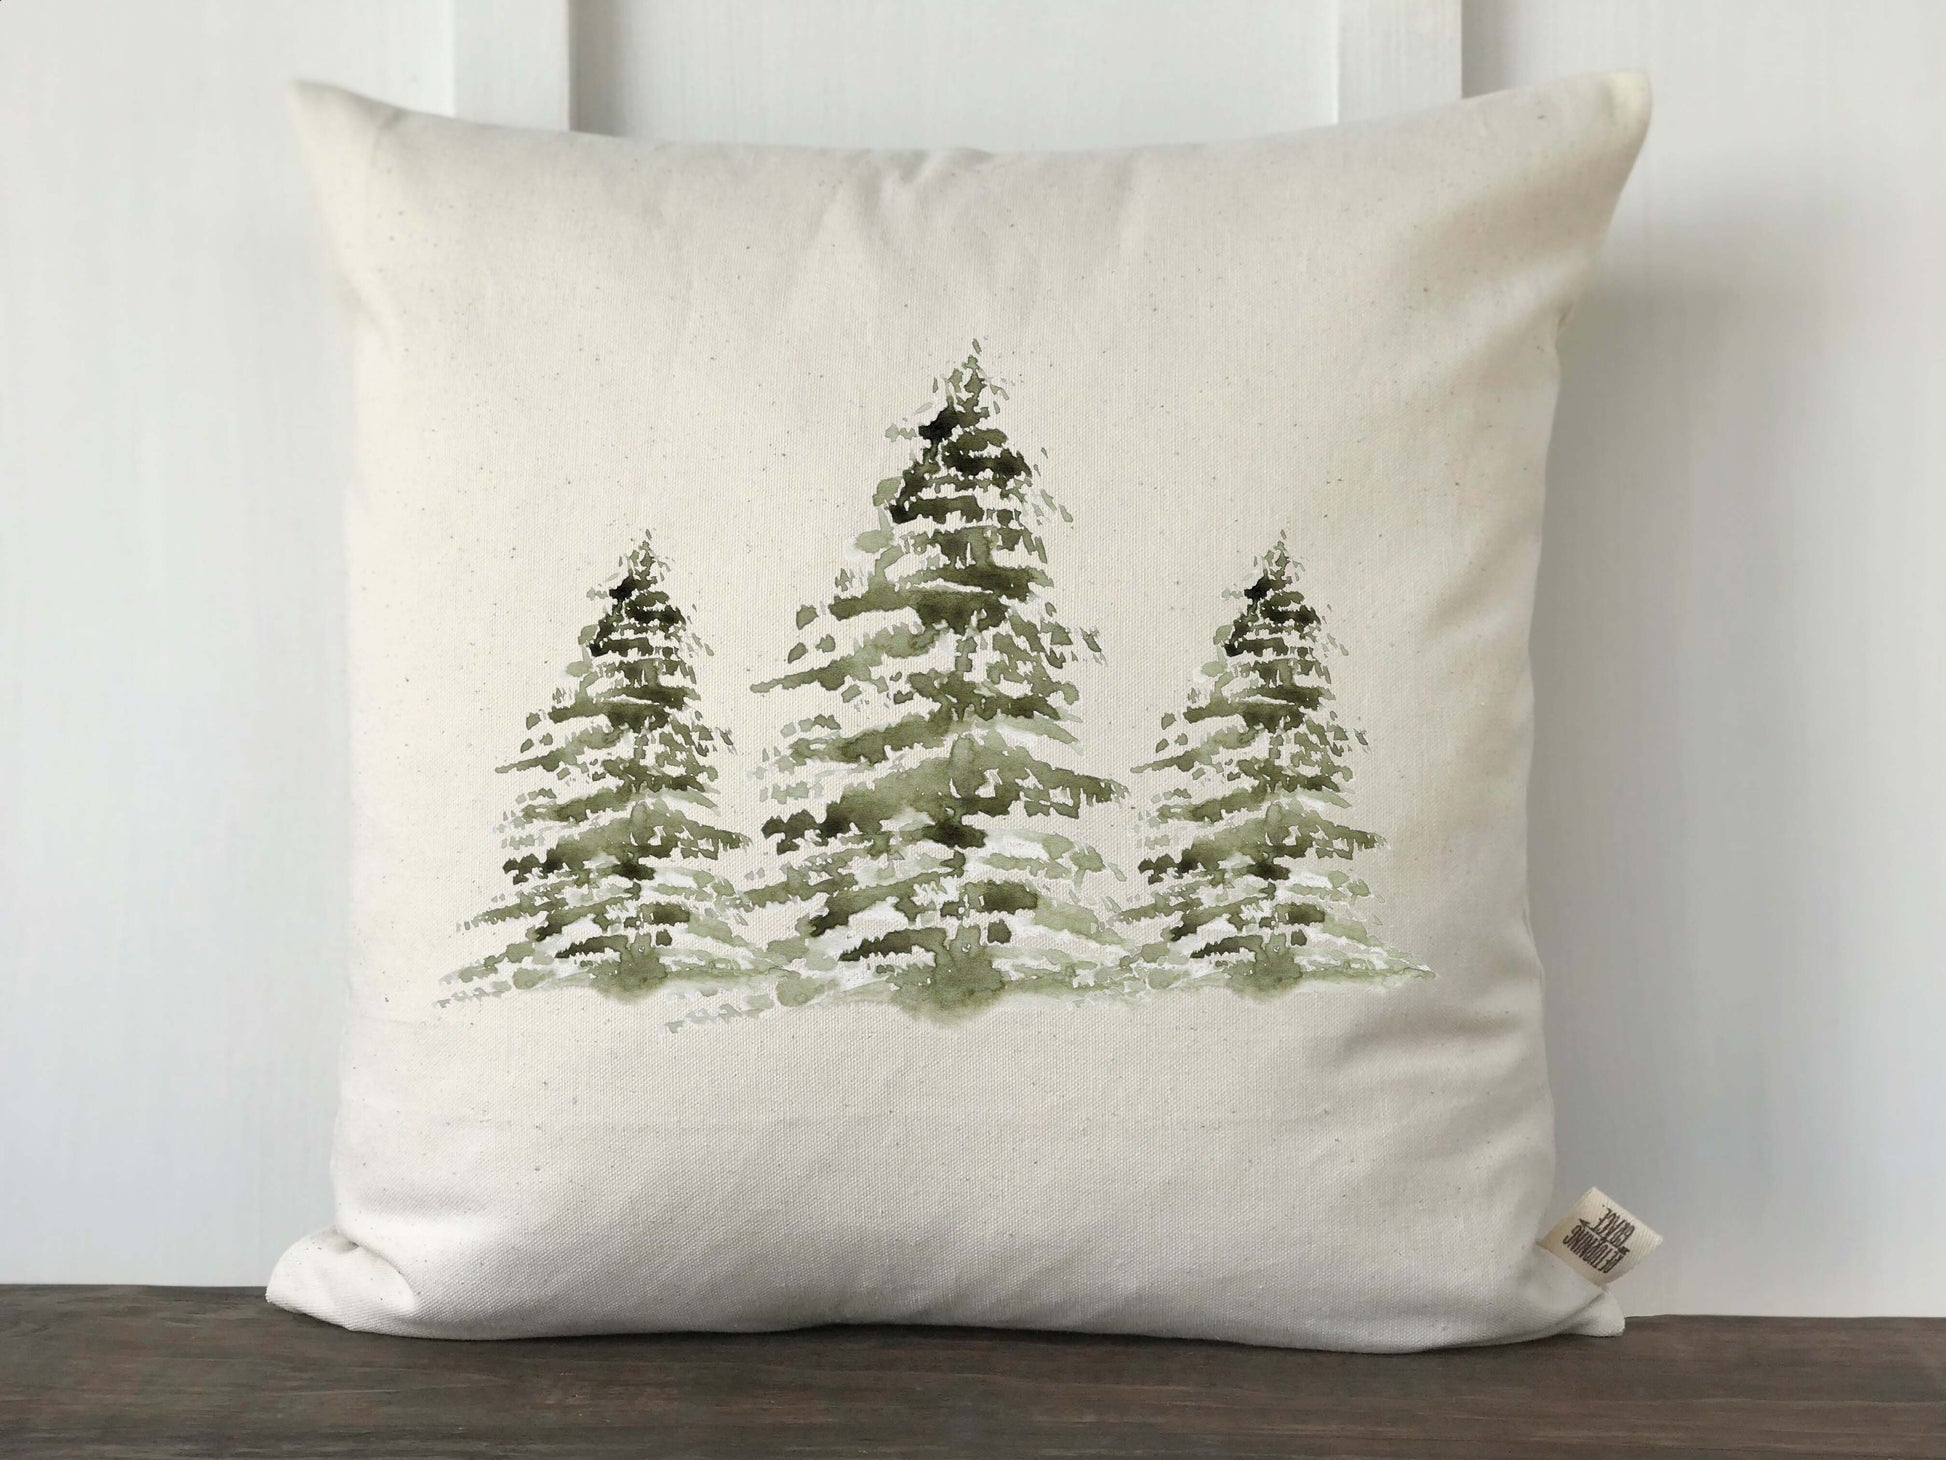 Watercolor 3 Christmas Trees Pillow Cover - Returning Grace Designs